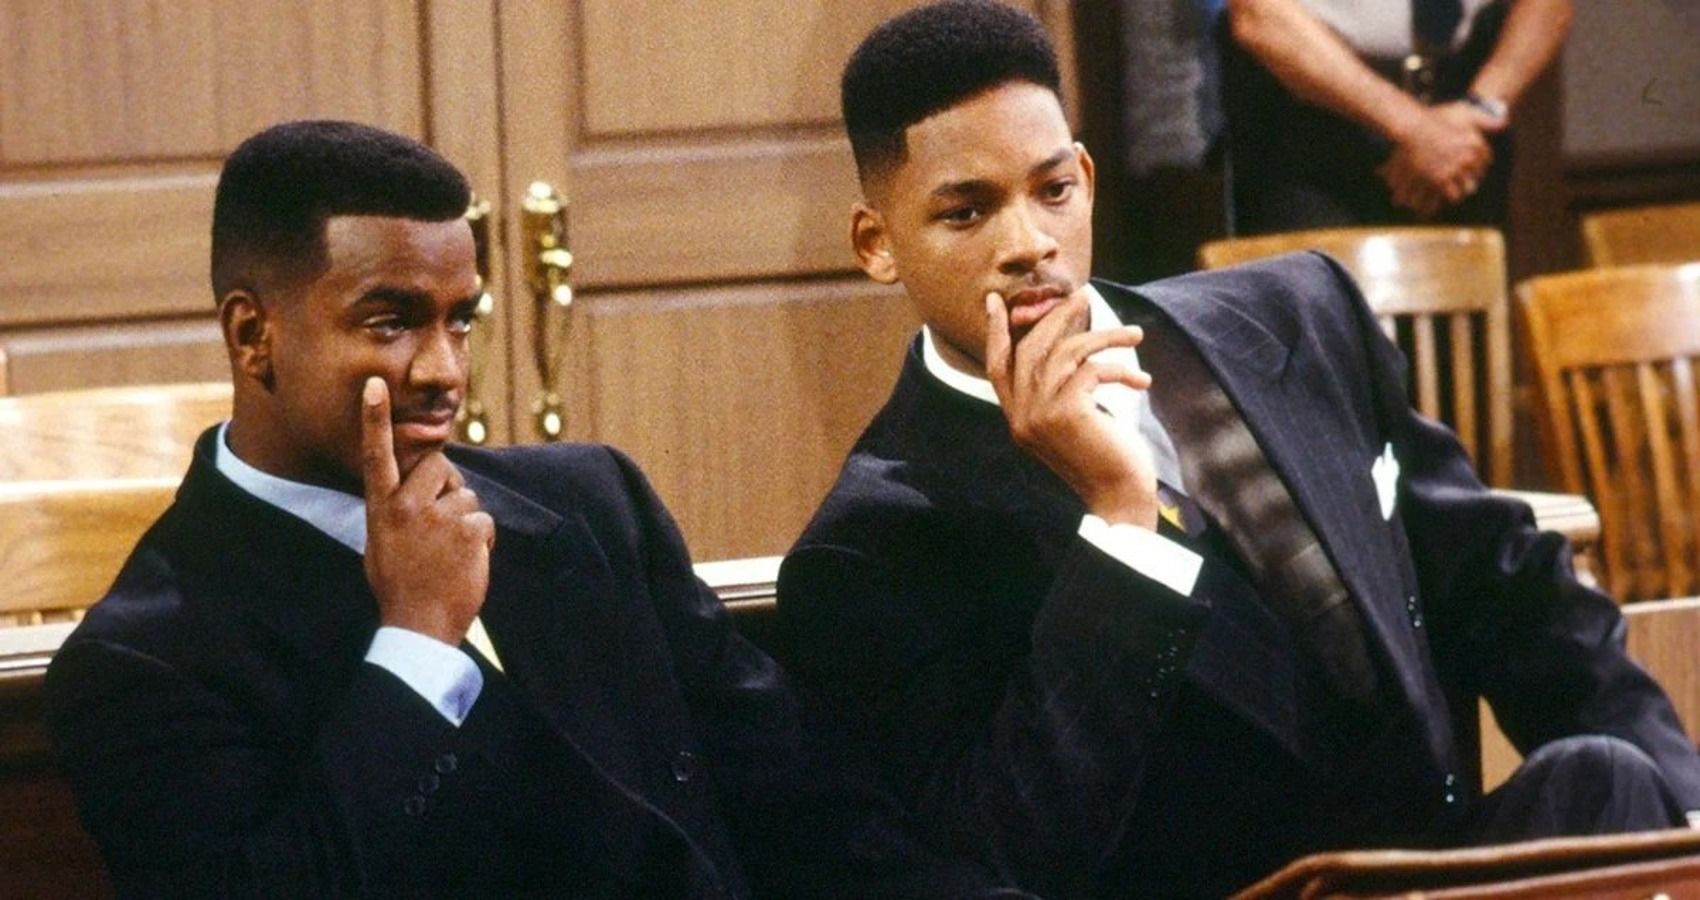 Will and Carlton have their hands to their face, thinking in their nice suits in court, in Fresh Prince of Bel Air